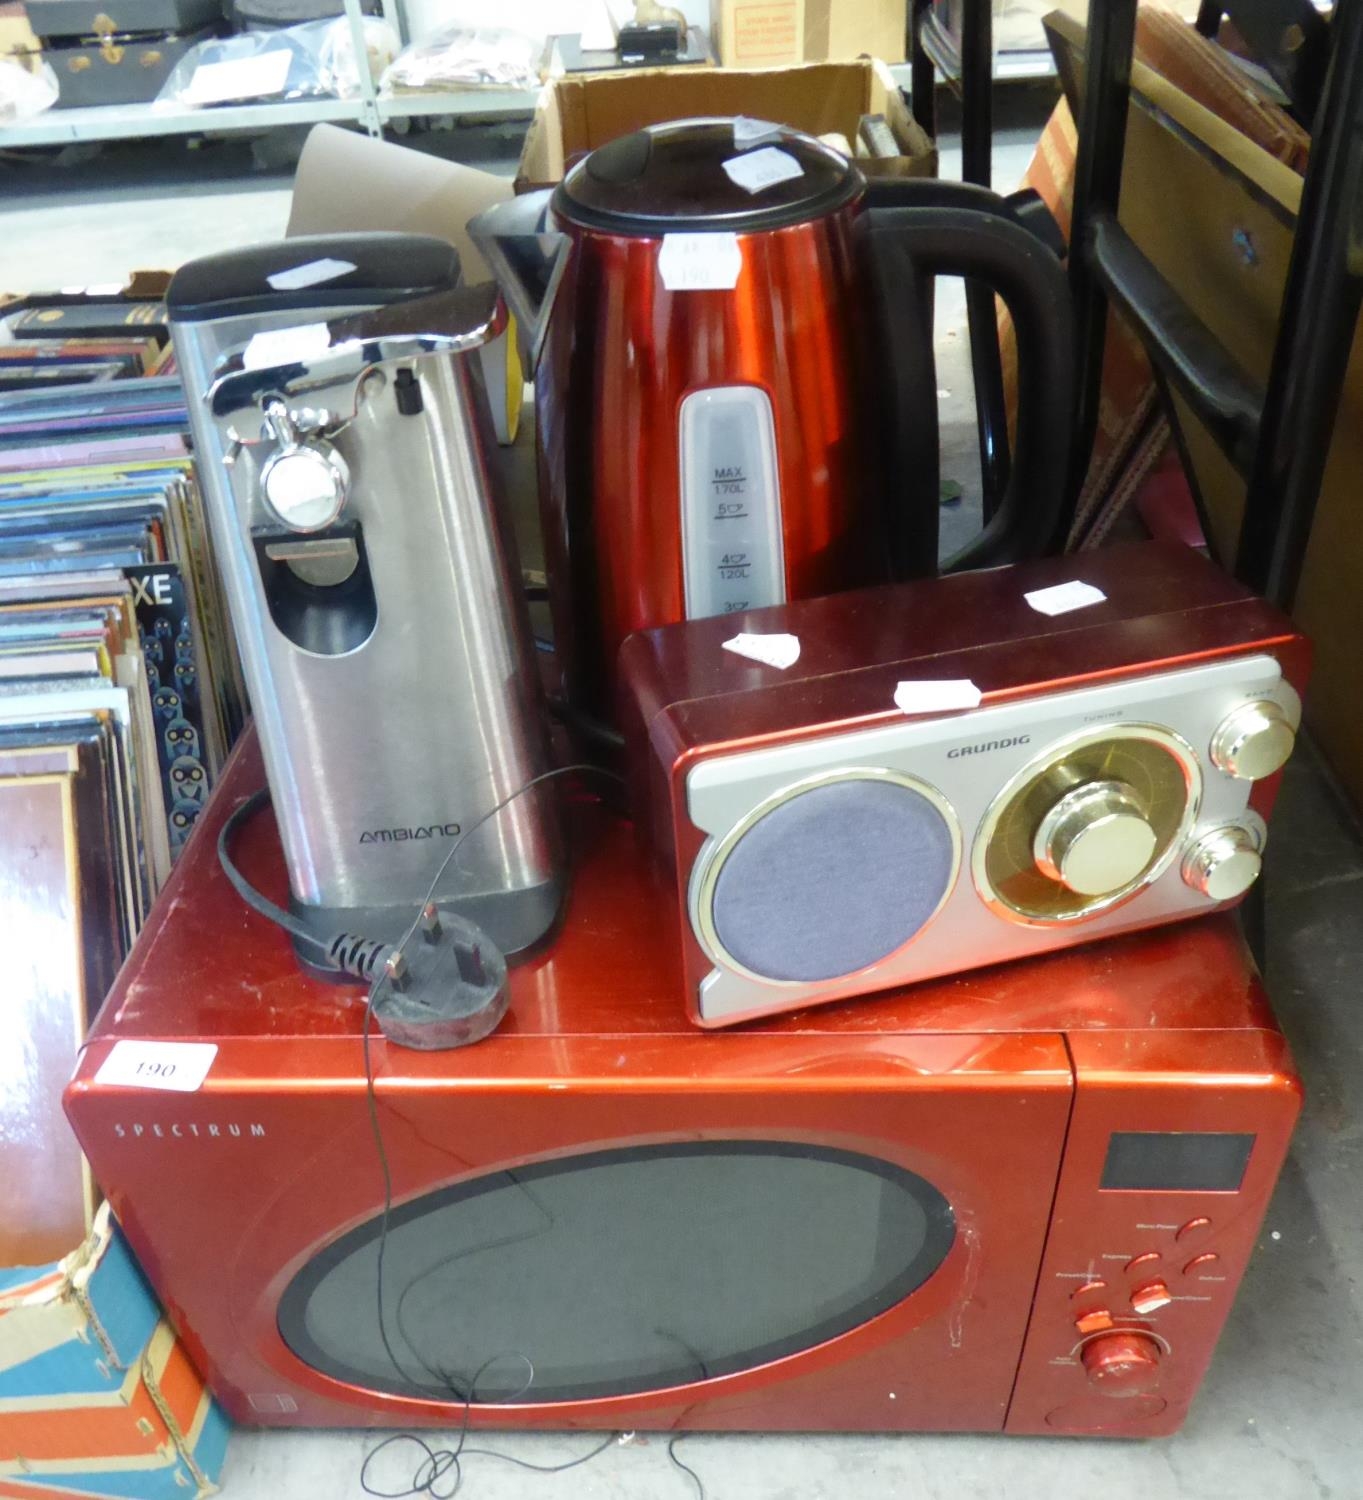 SPECTRUM RED CASE MICROWAVE OVEN; AN ELECTRIC CAN OPENER;KETTLE AND A GRUNDIG RADIO